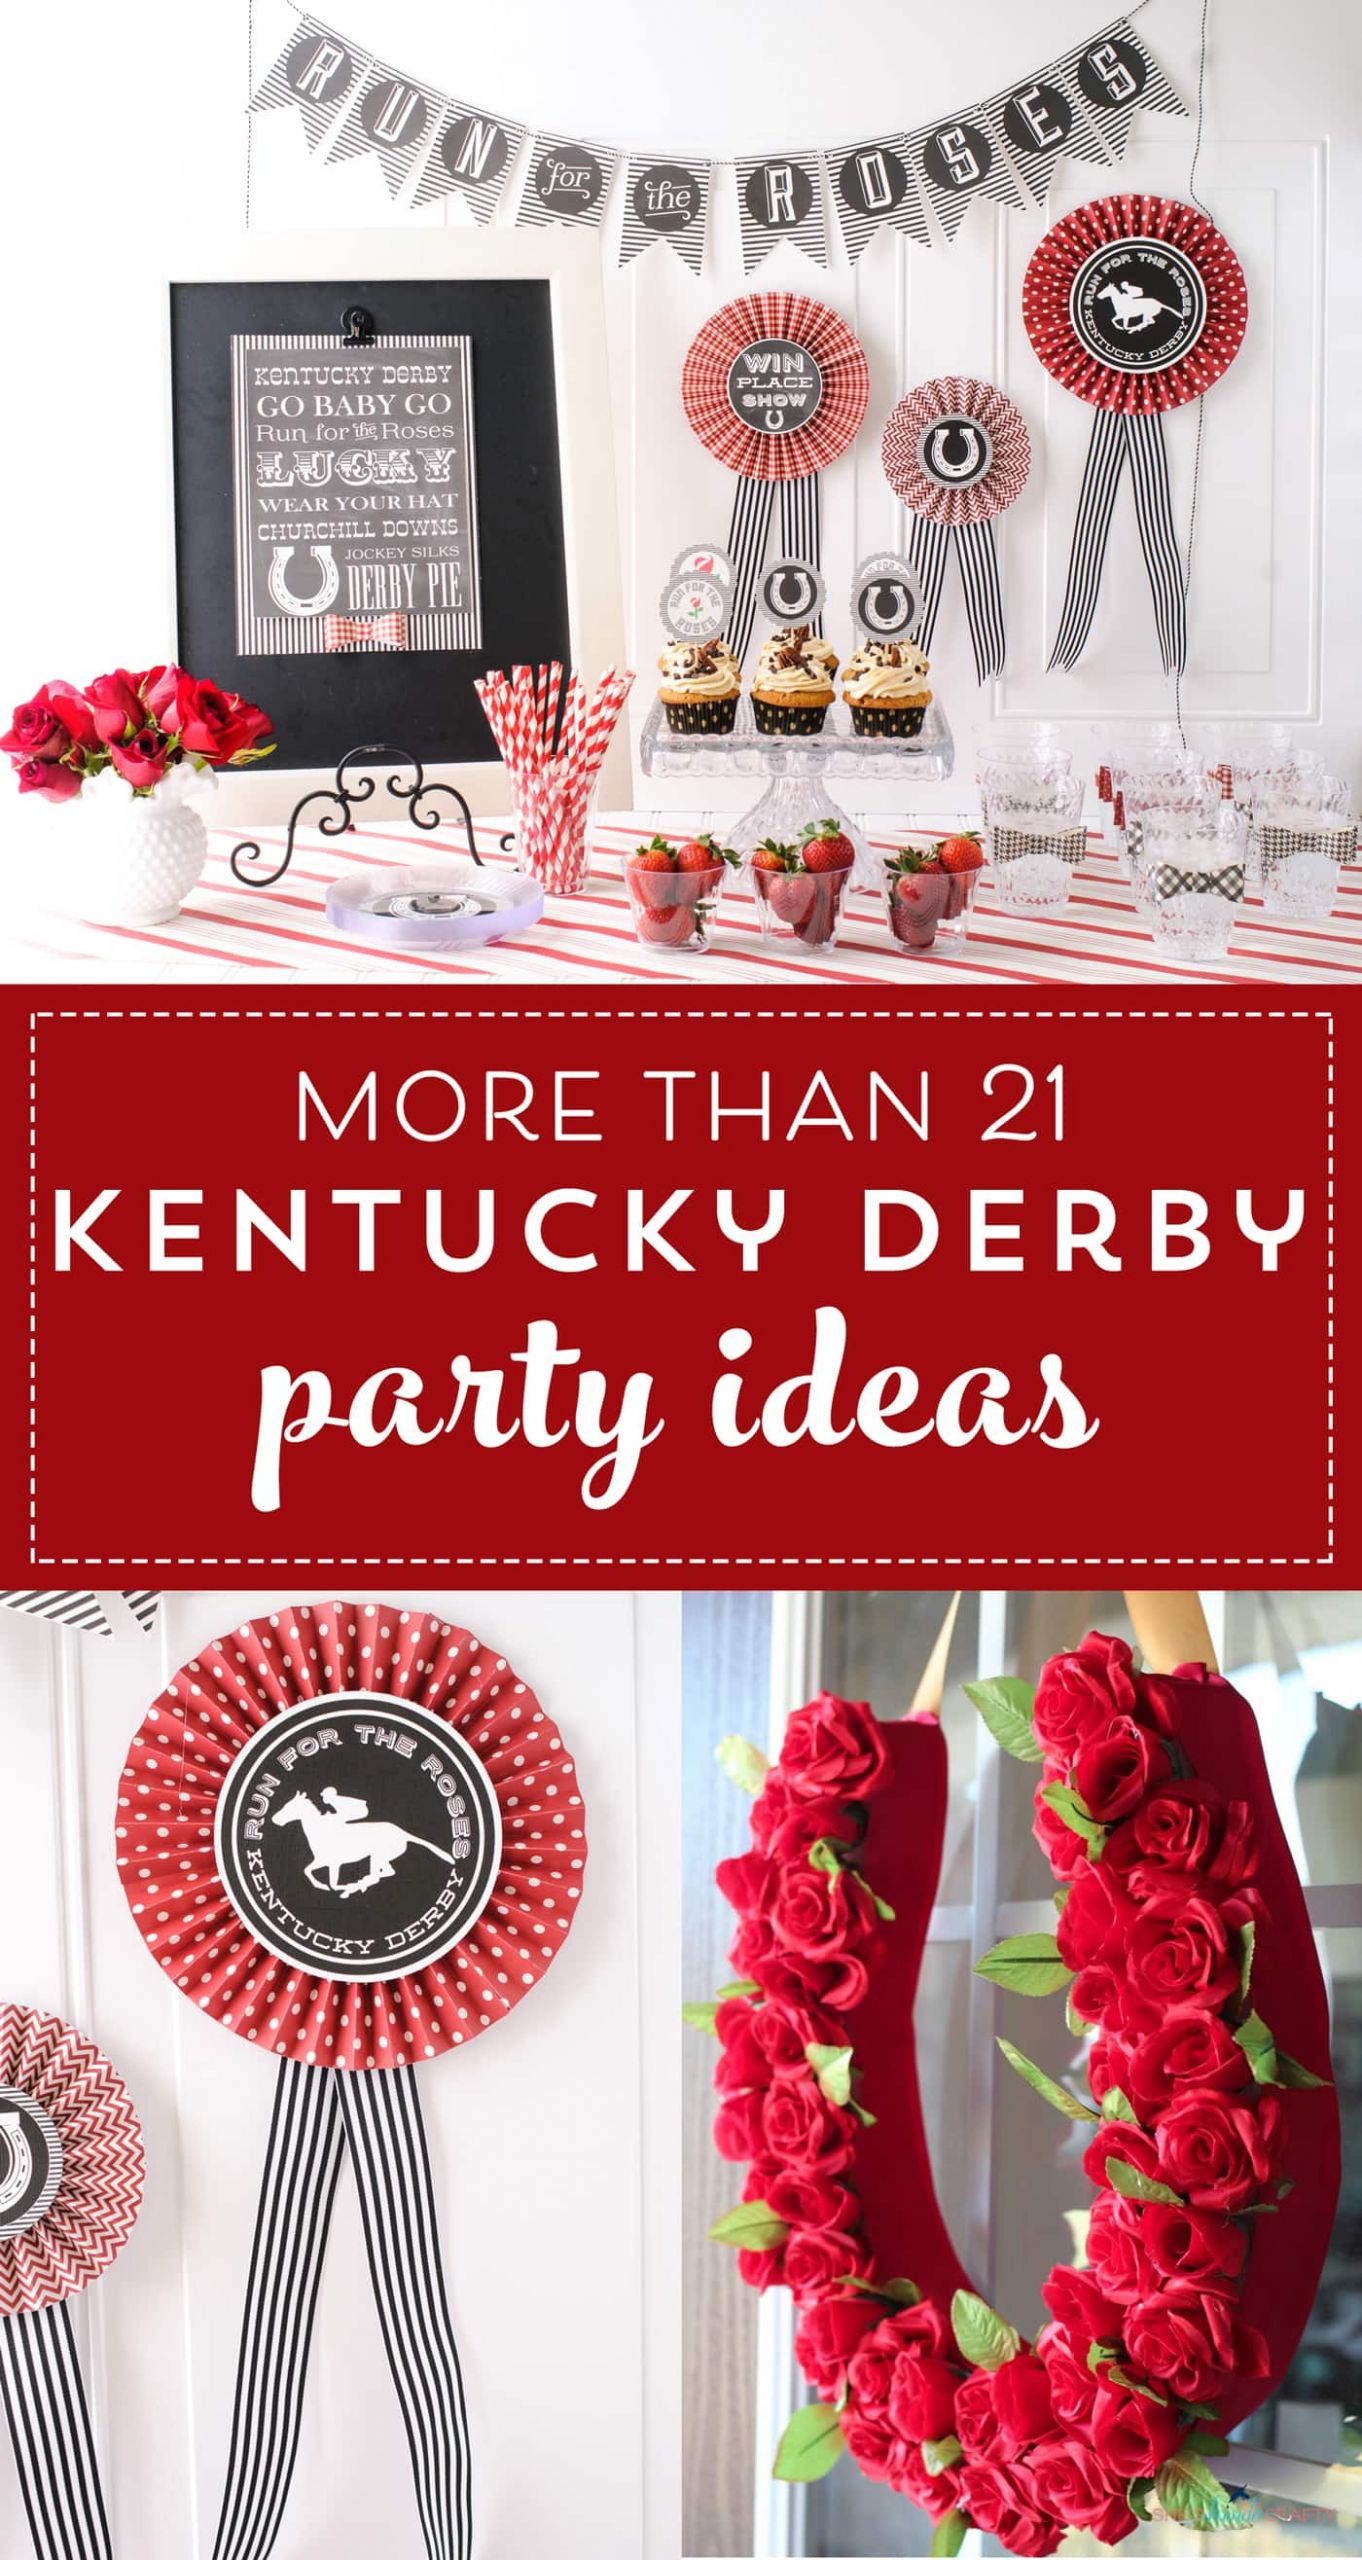 The Best Ideas for Kentucky Derby Party Pool Ideas Home, Family